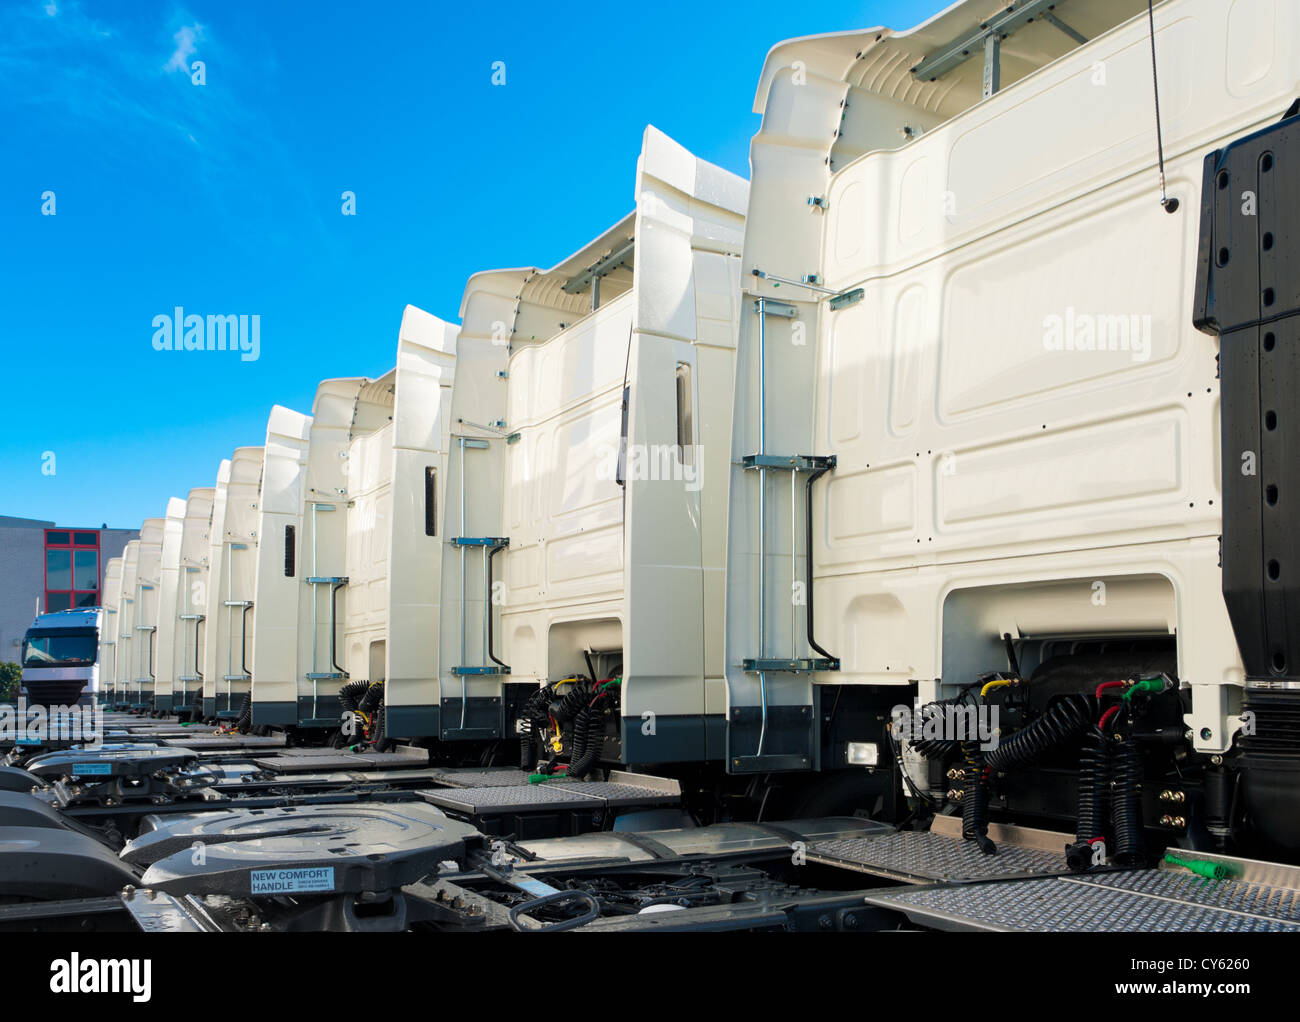 white trucks for rental on an industrial area Stock Photo